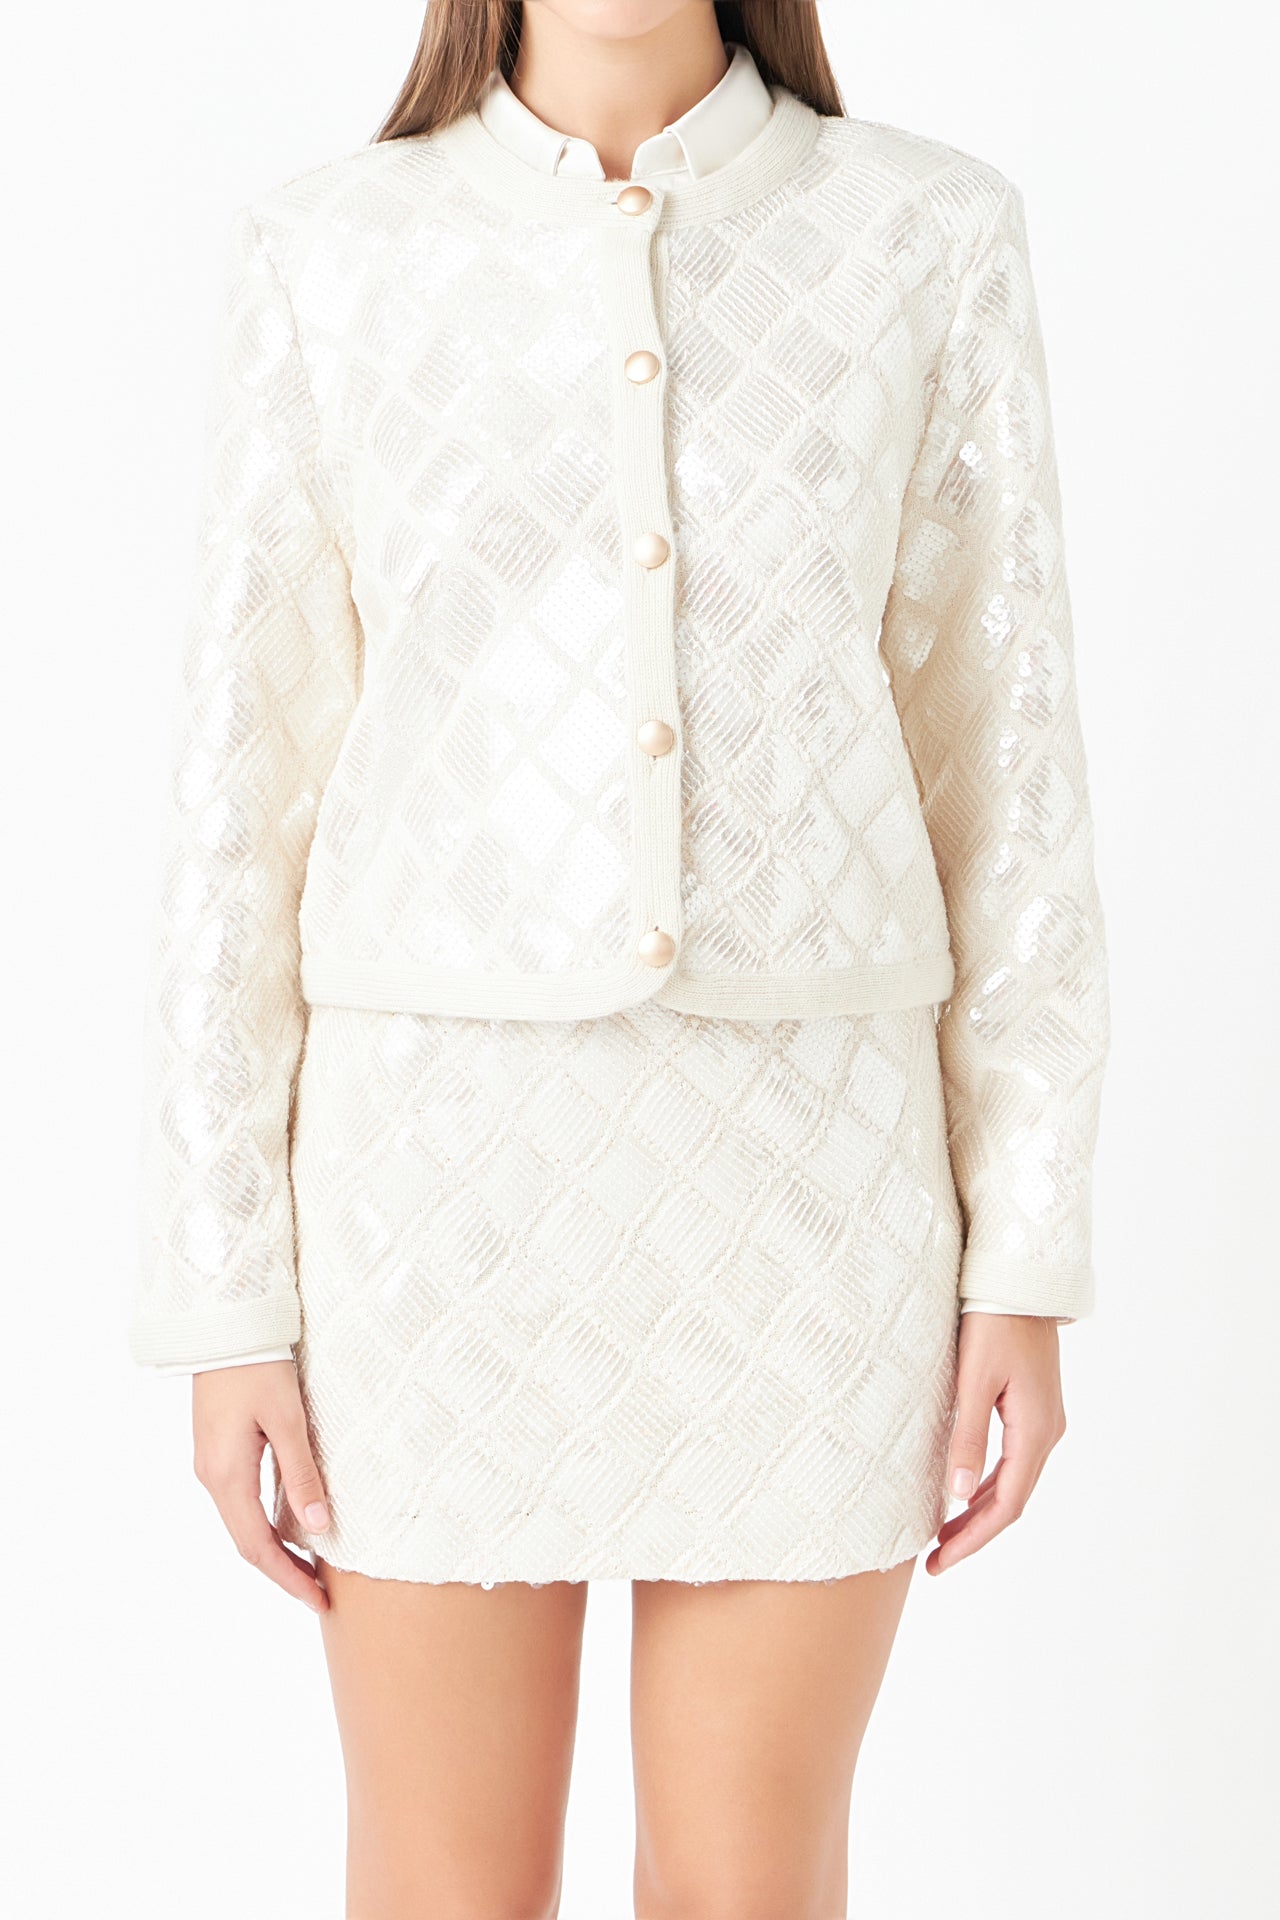 ENDLESS ROSE - Sequin Patchwork Crocket Jacket - JACKETS available at Objectrare